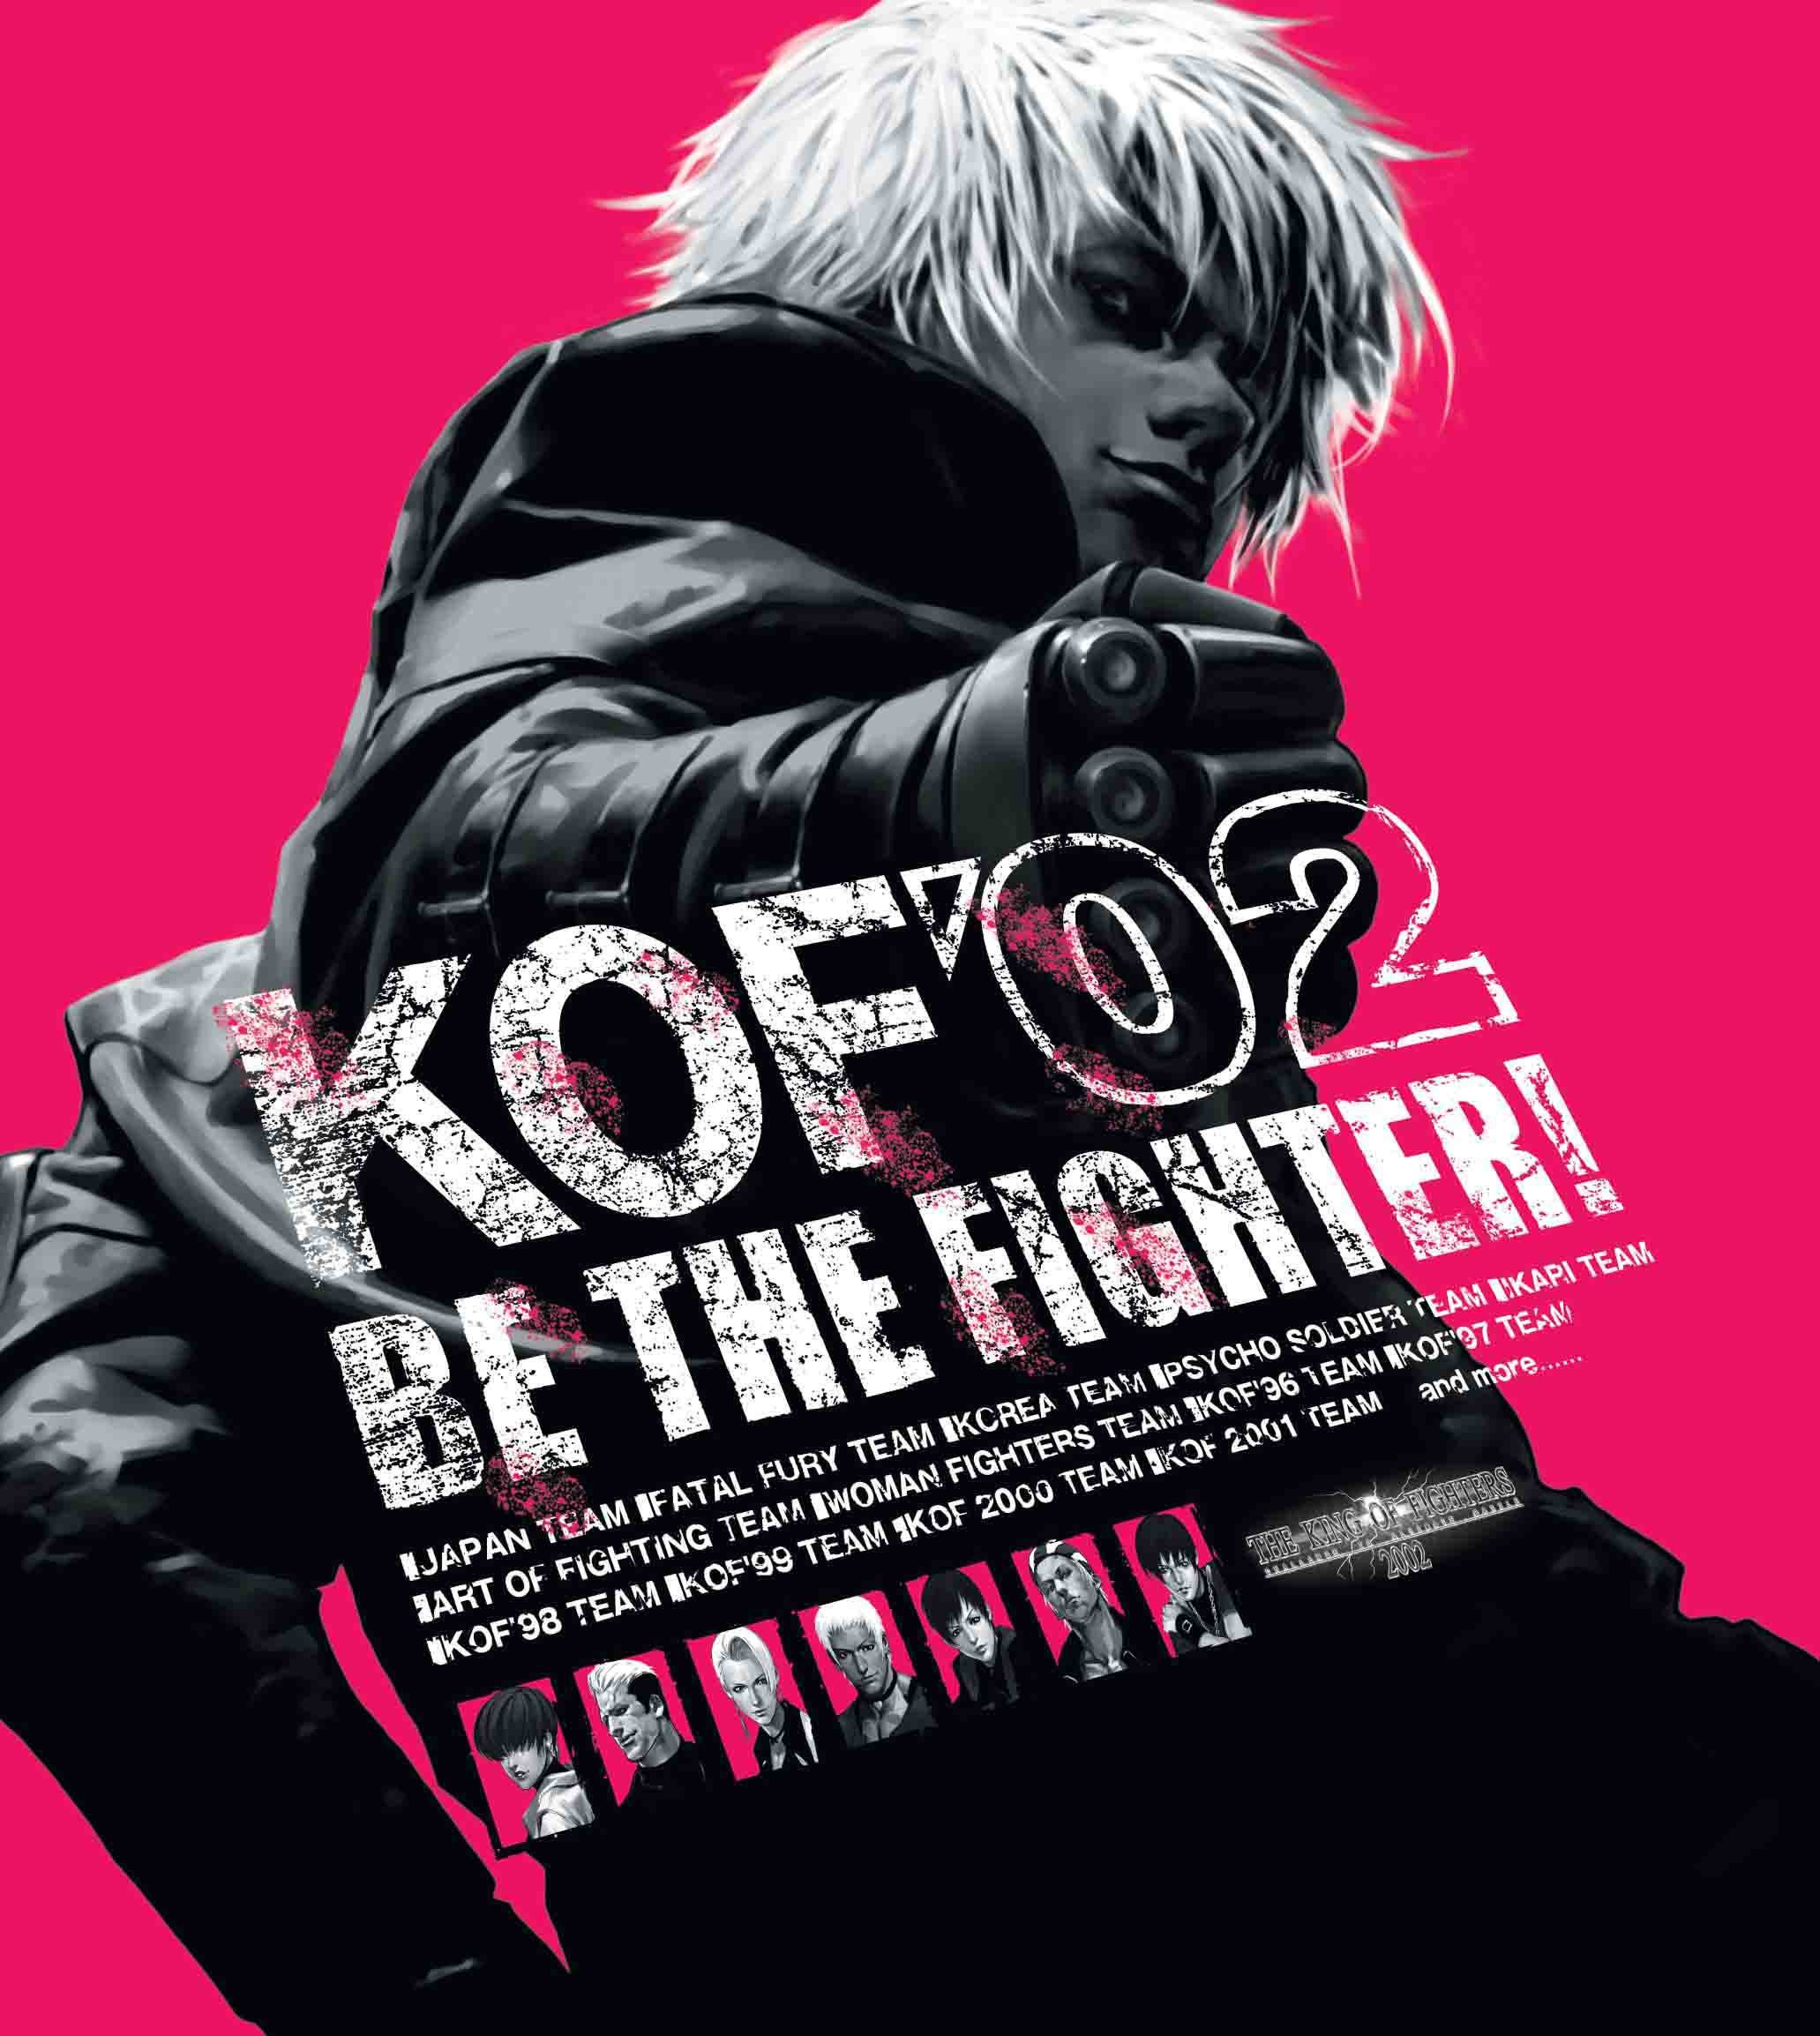 How to Play King of Fighters 97 on Android, KOF 97 ULTRA Power Leona Game apk  download